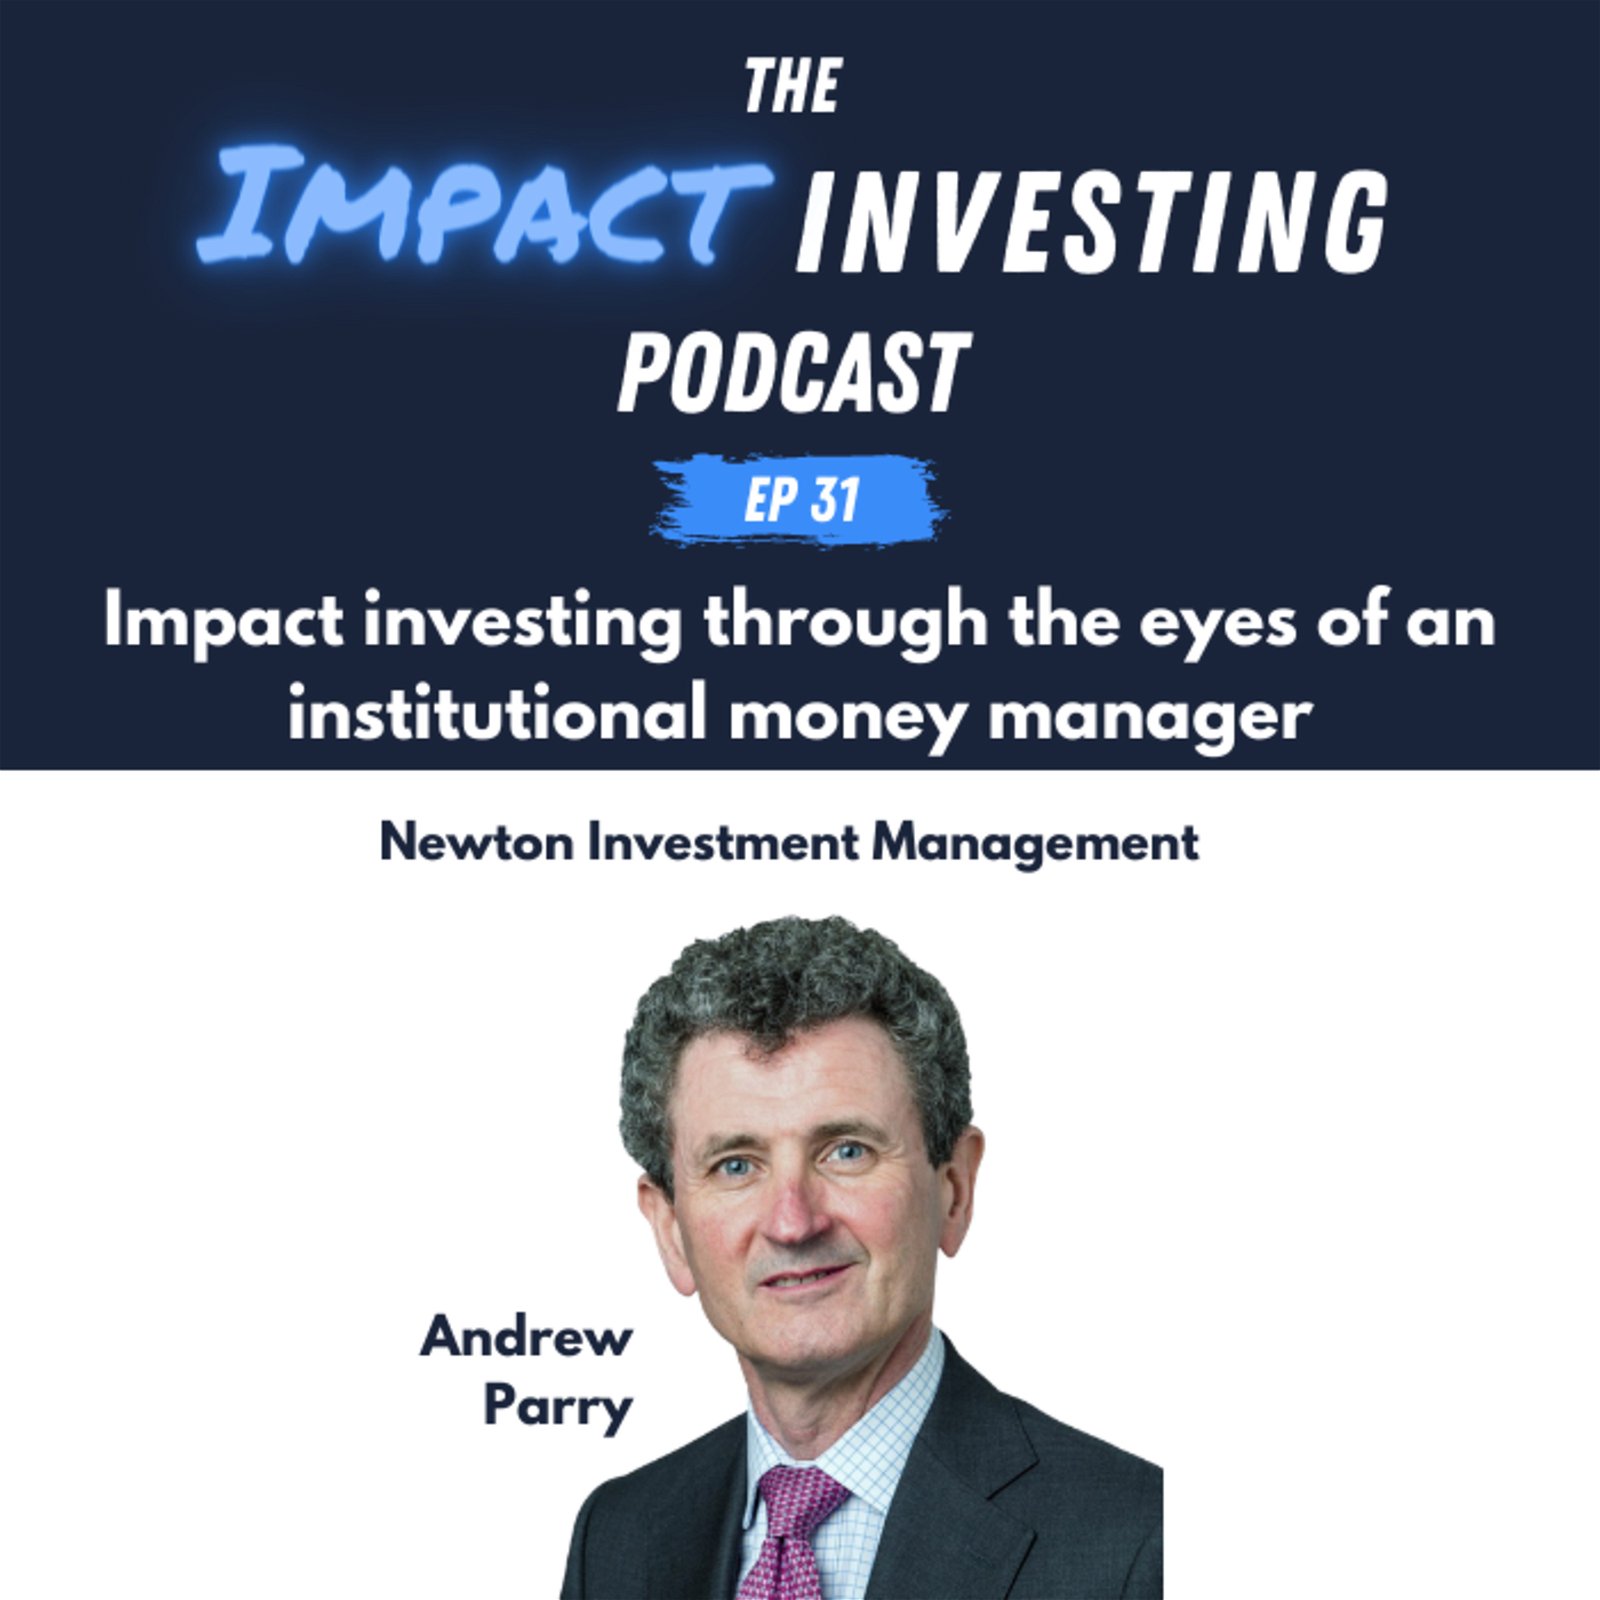 31 - Impact investing through the eyes of an institutional money manager